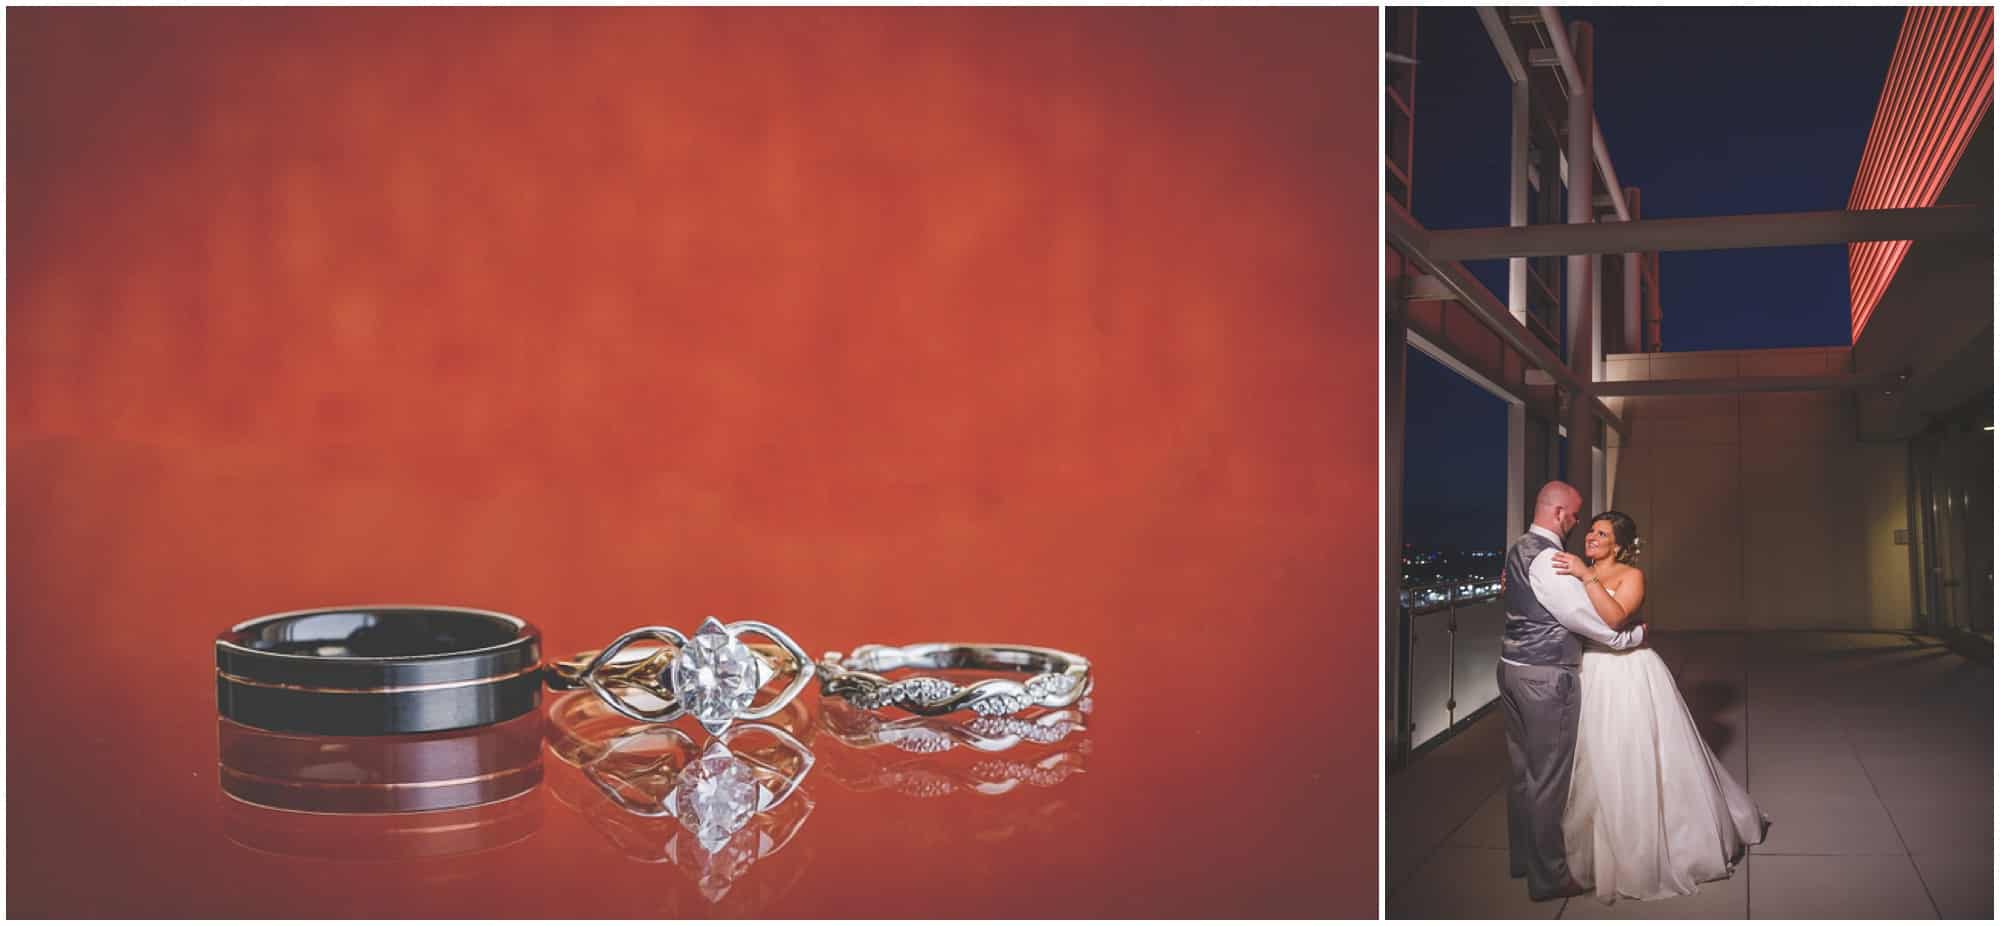 ring detail picture set against an orange backgrond and a night portrait of bride and groom on the balcony outside at Hotel Arista in Naperville